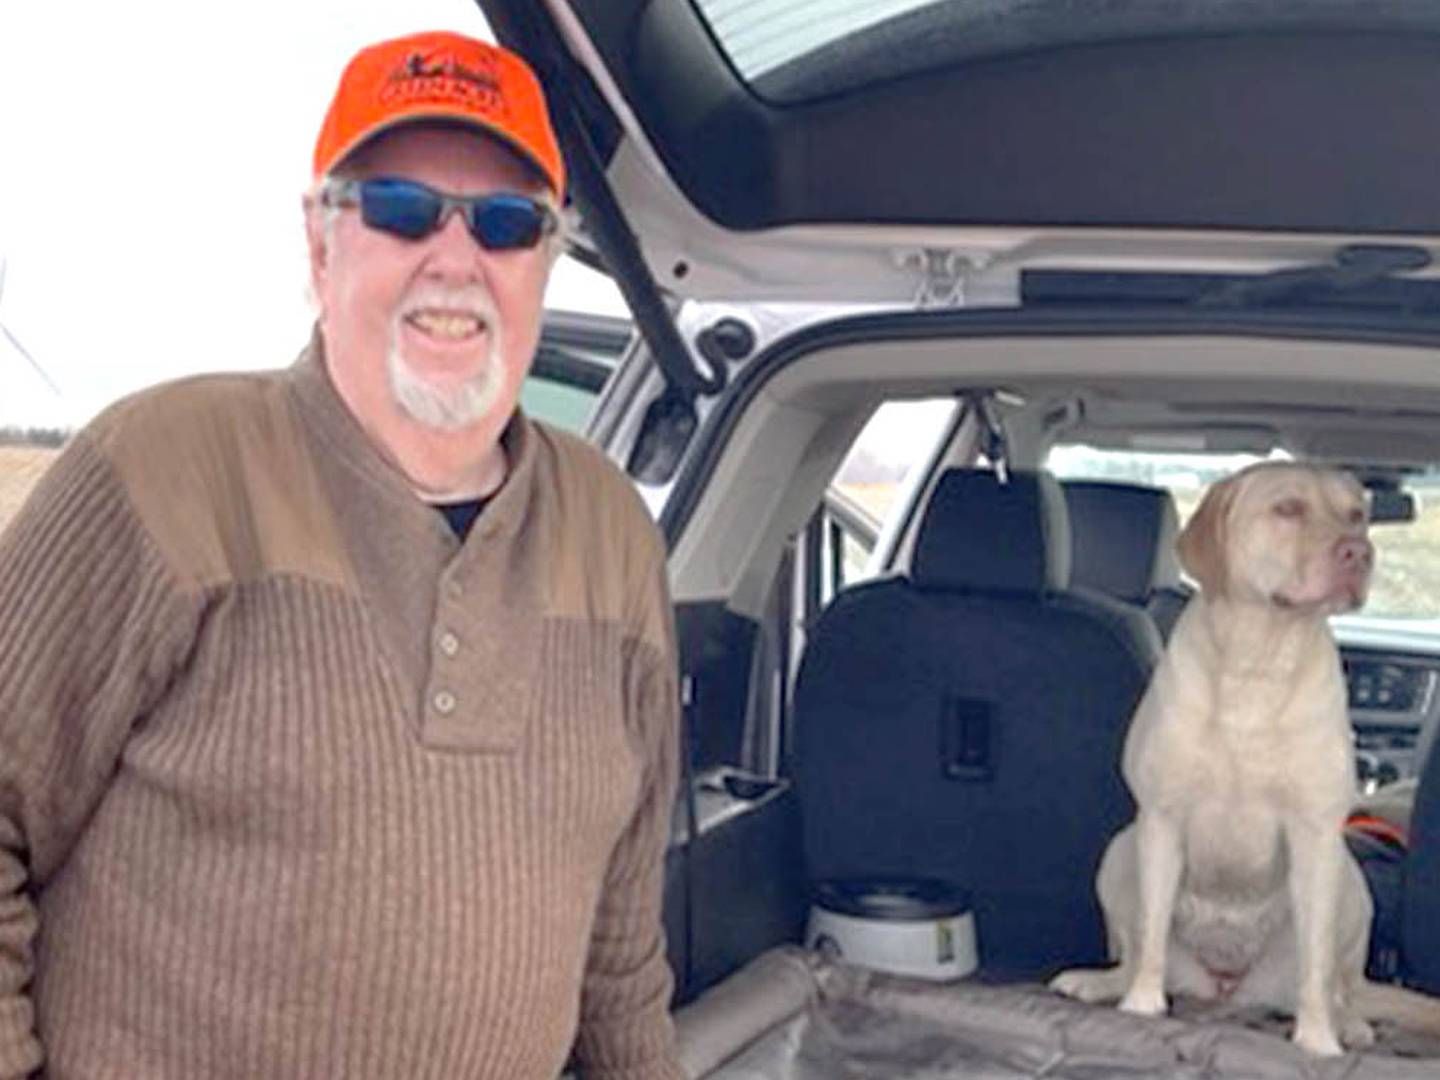 Larry Finn, co-owner of Pizza Villa in DeKalb, is shown shortly before he died unexpectedly on Tuesday, Dec. 14, 2021 at age 76. Finn had been pheasant hunting in Princeton, Illinois, before he died. (Photo provided by CJ Finn).